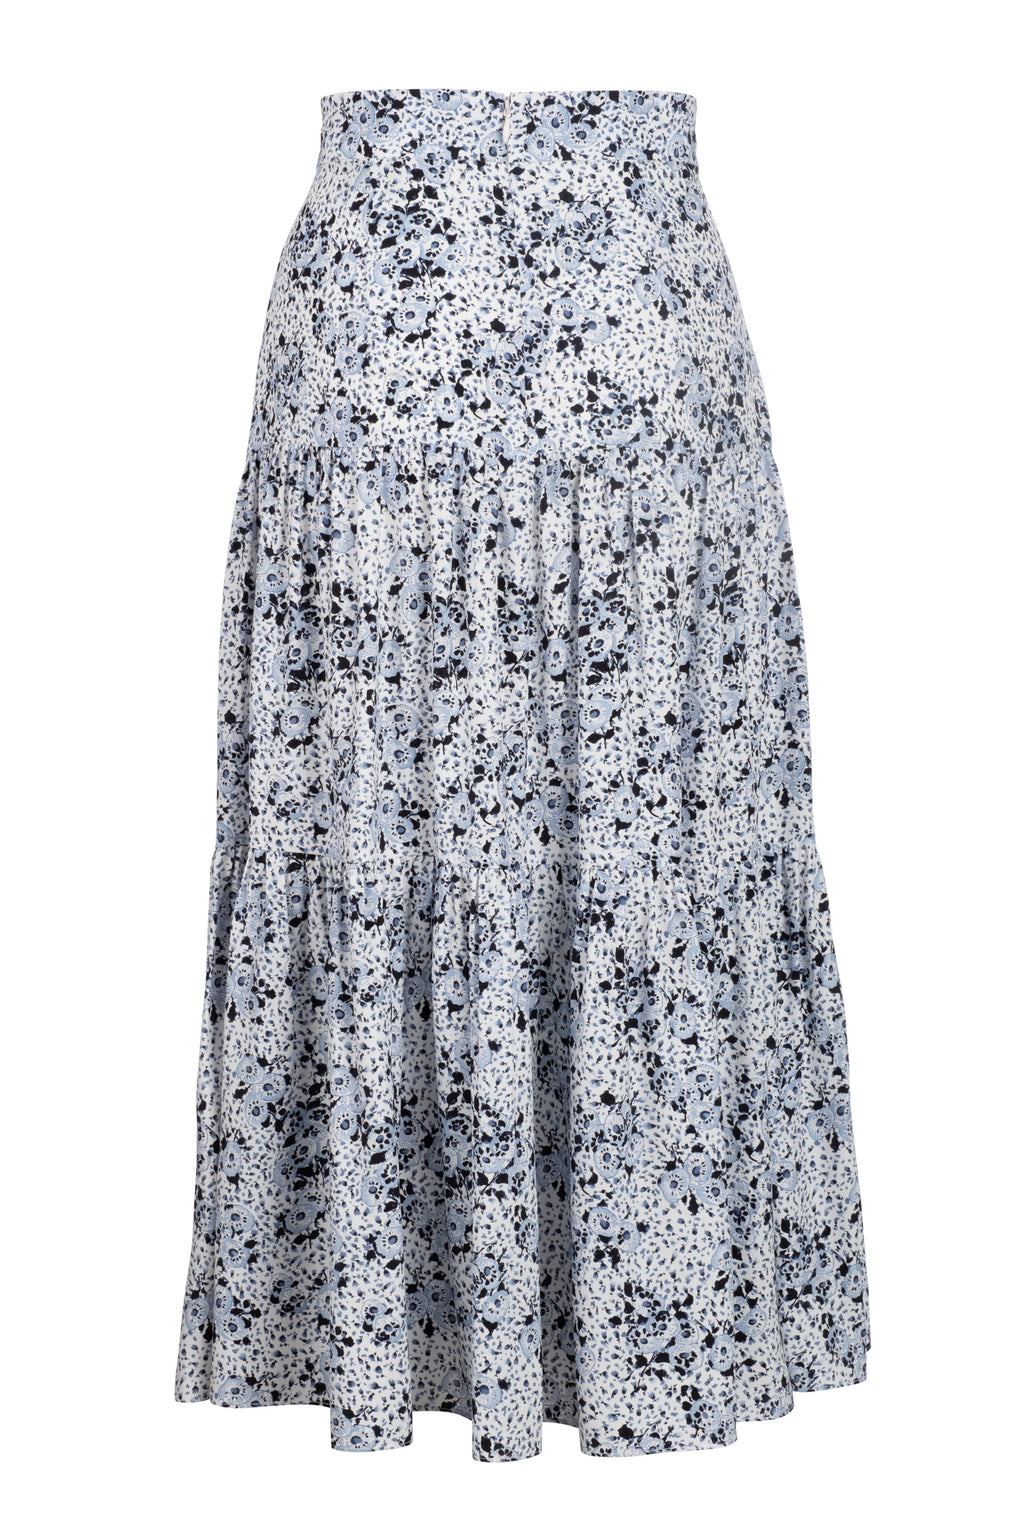 Tiered Midi Skirt - Blue Water Lily